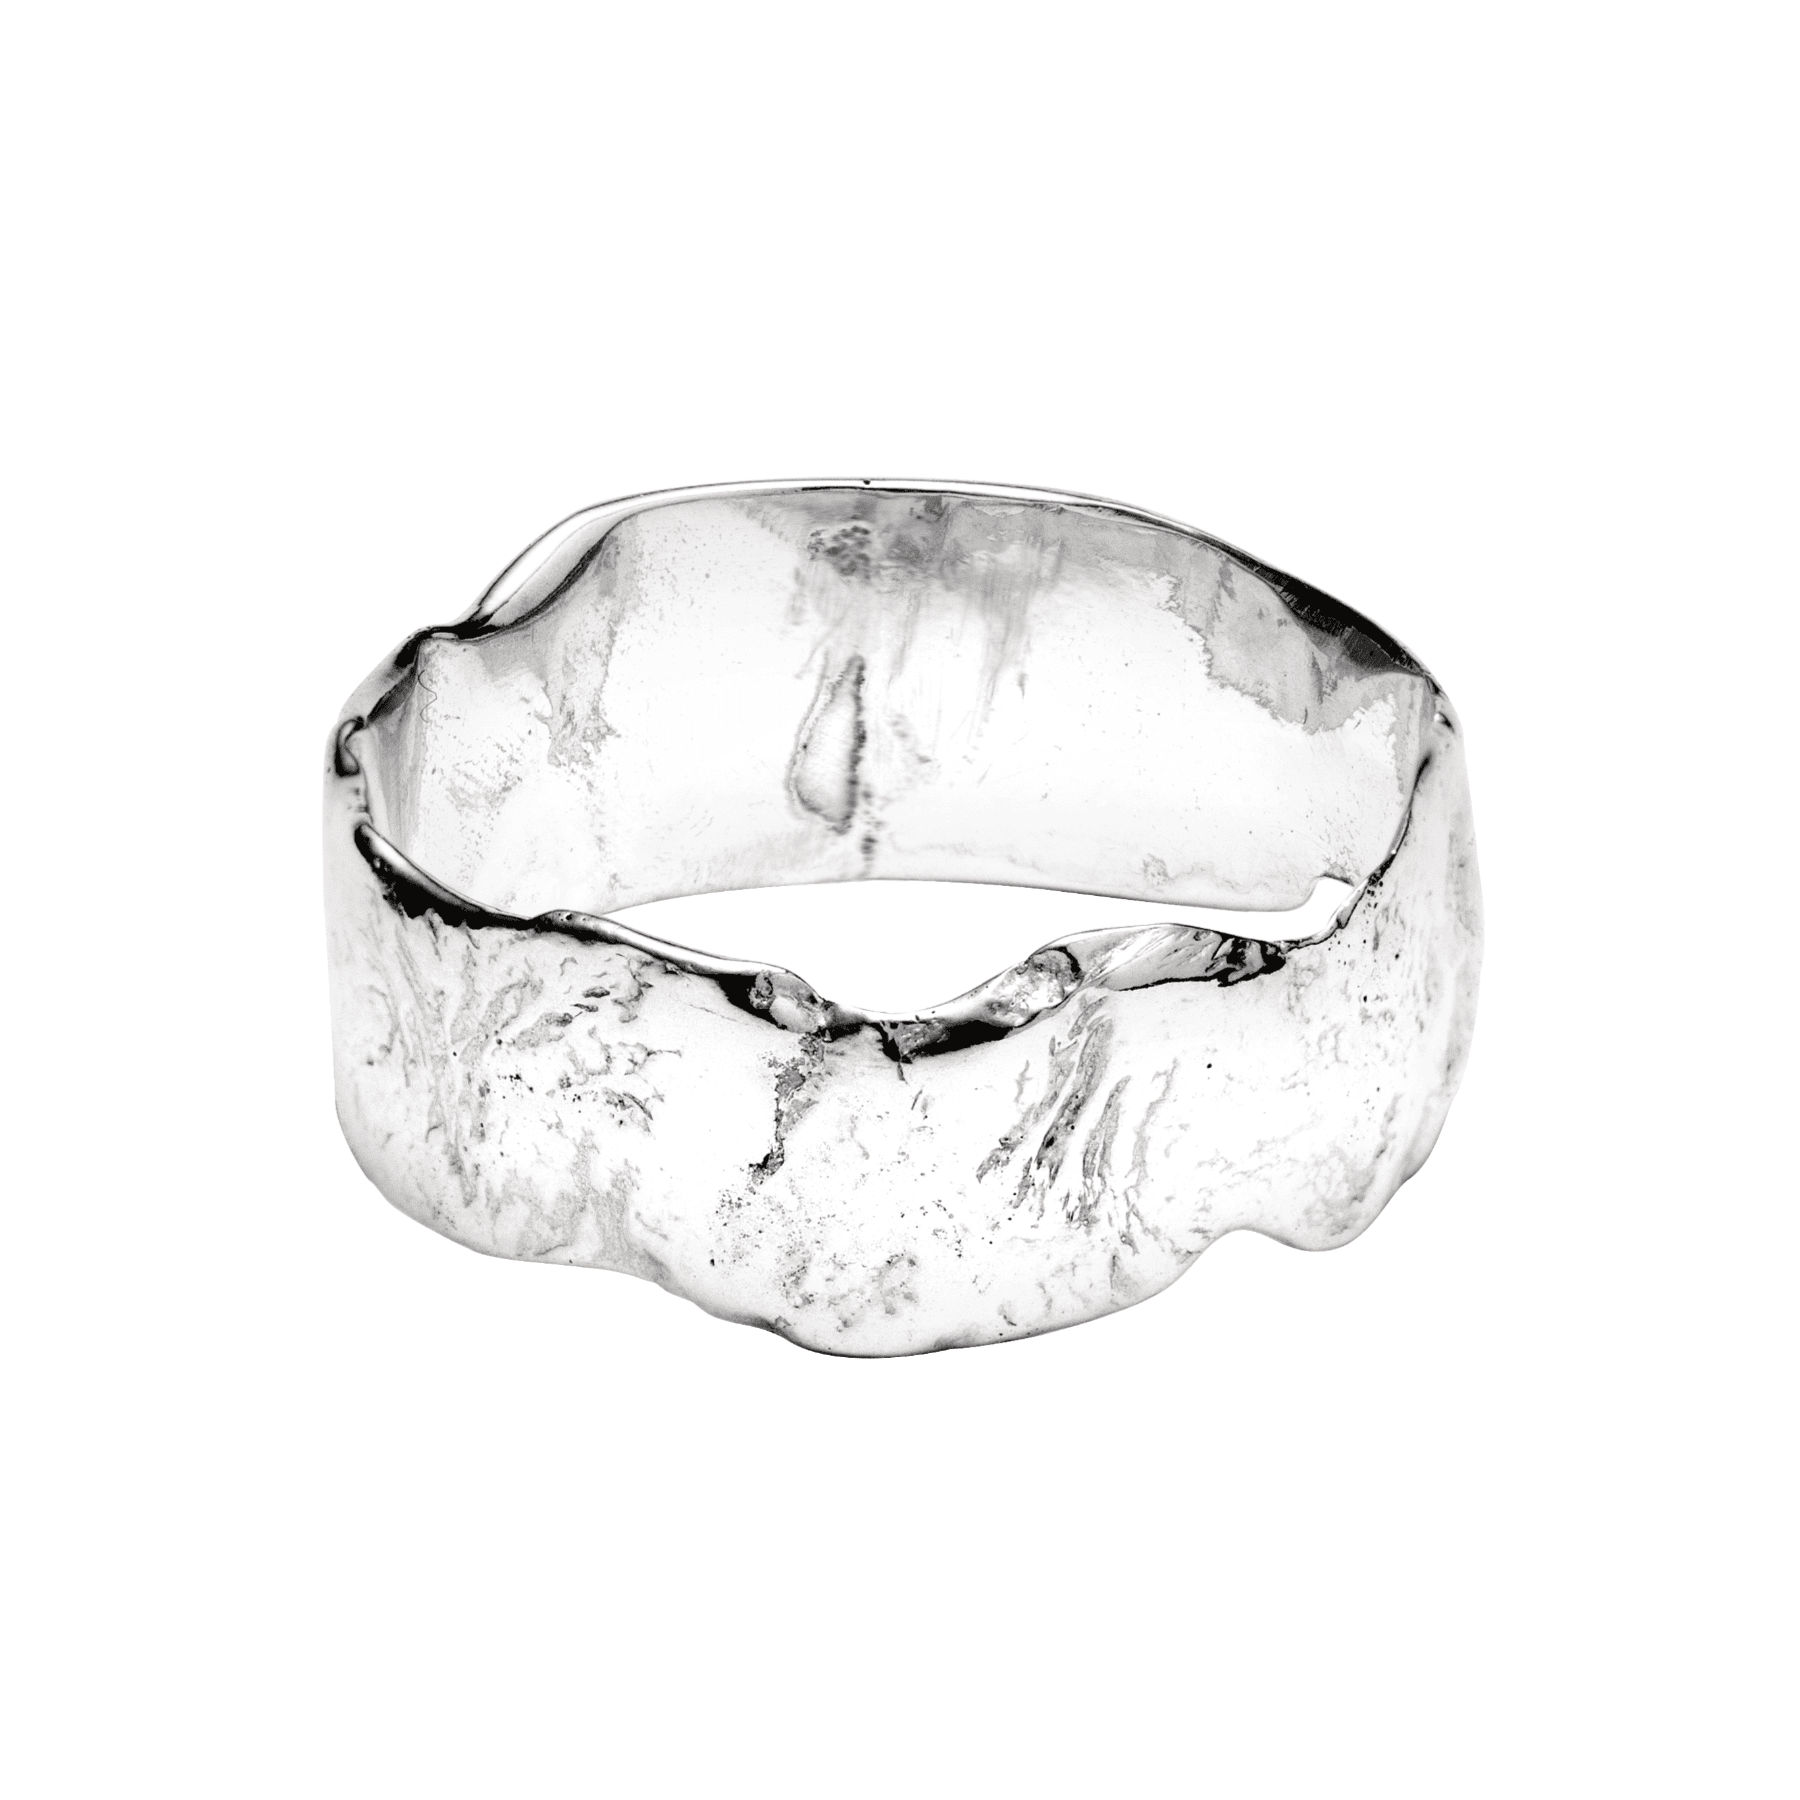 Silver irregular ring on a light background